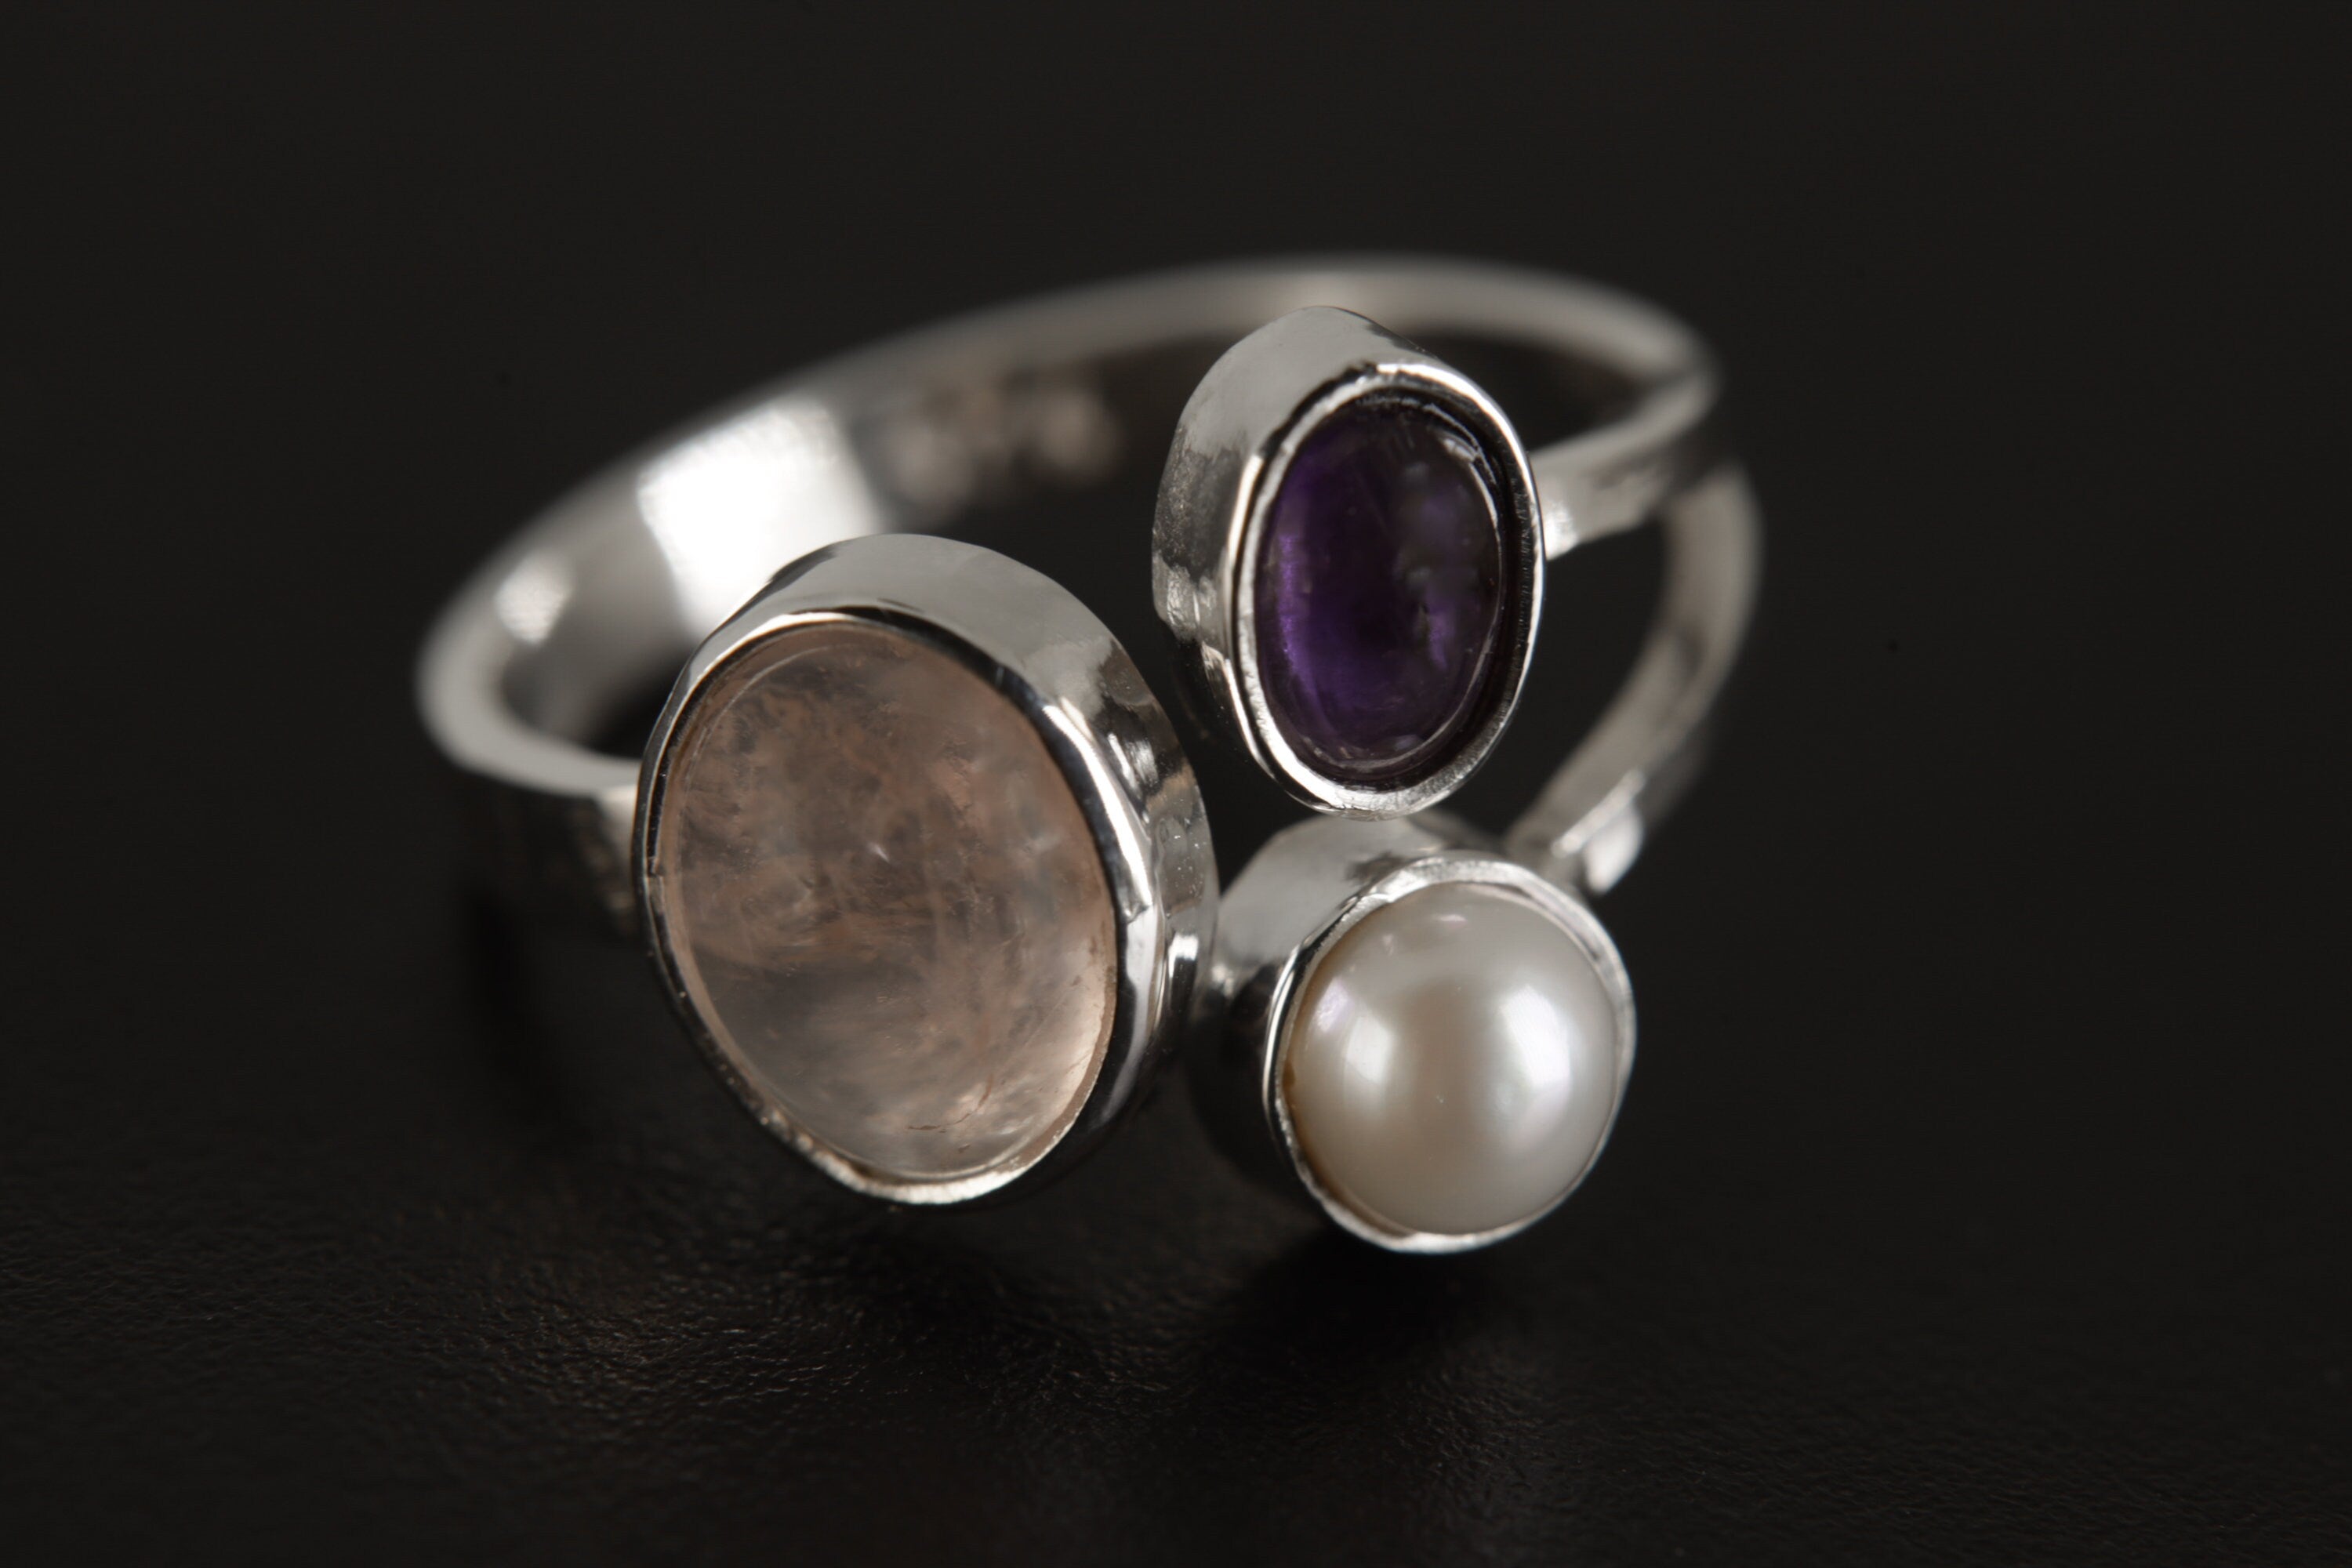 Lavender Pearl Bliss Adjustable Ring - Amethyst, Pearl & Rose Quartz - Sterling Silver Ring - Hammer Textured Shiny Finish - Size 5-12 US